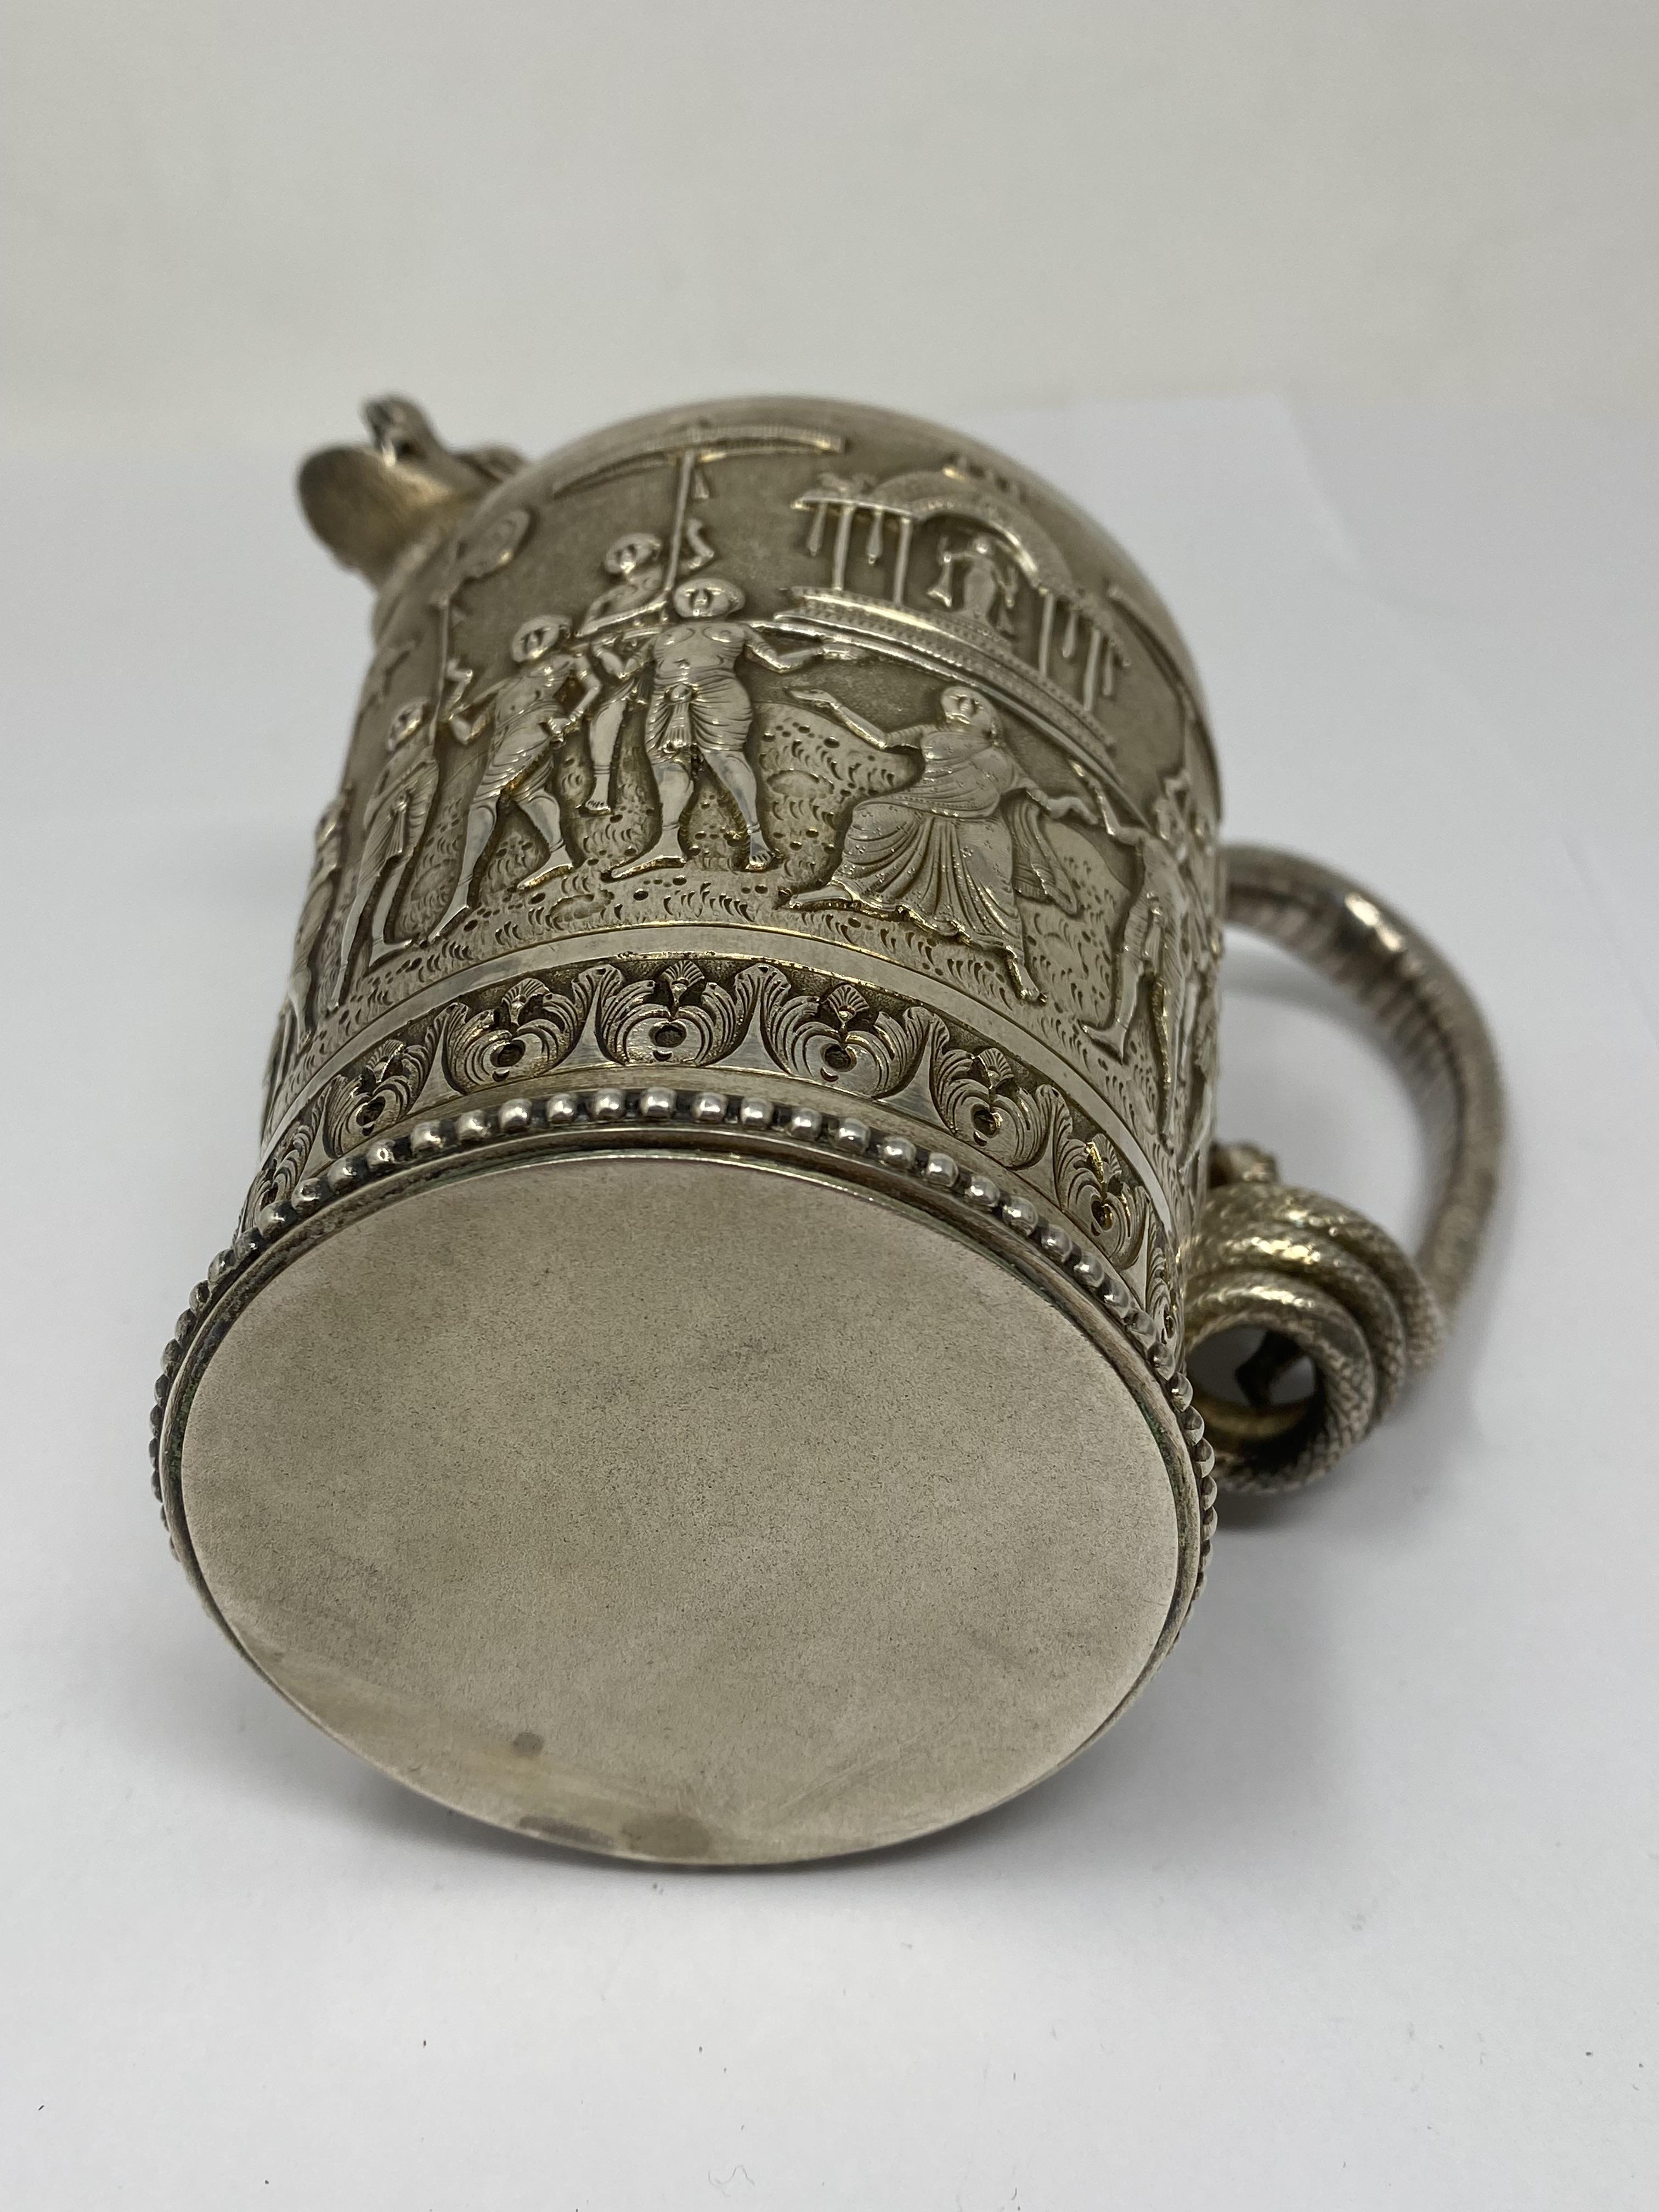 ˜A PARCEL-GILT-SILVER TEA SET, ATTRIBUTED TO P. ORR AND SONS, MADRAS (CHENNAI), INDIA, CIRCA 1905-10 - Image 3 of 18